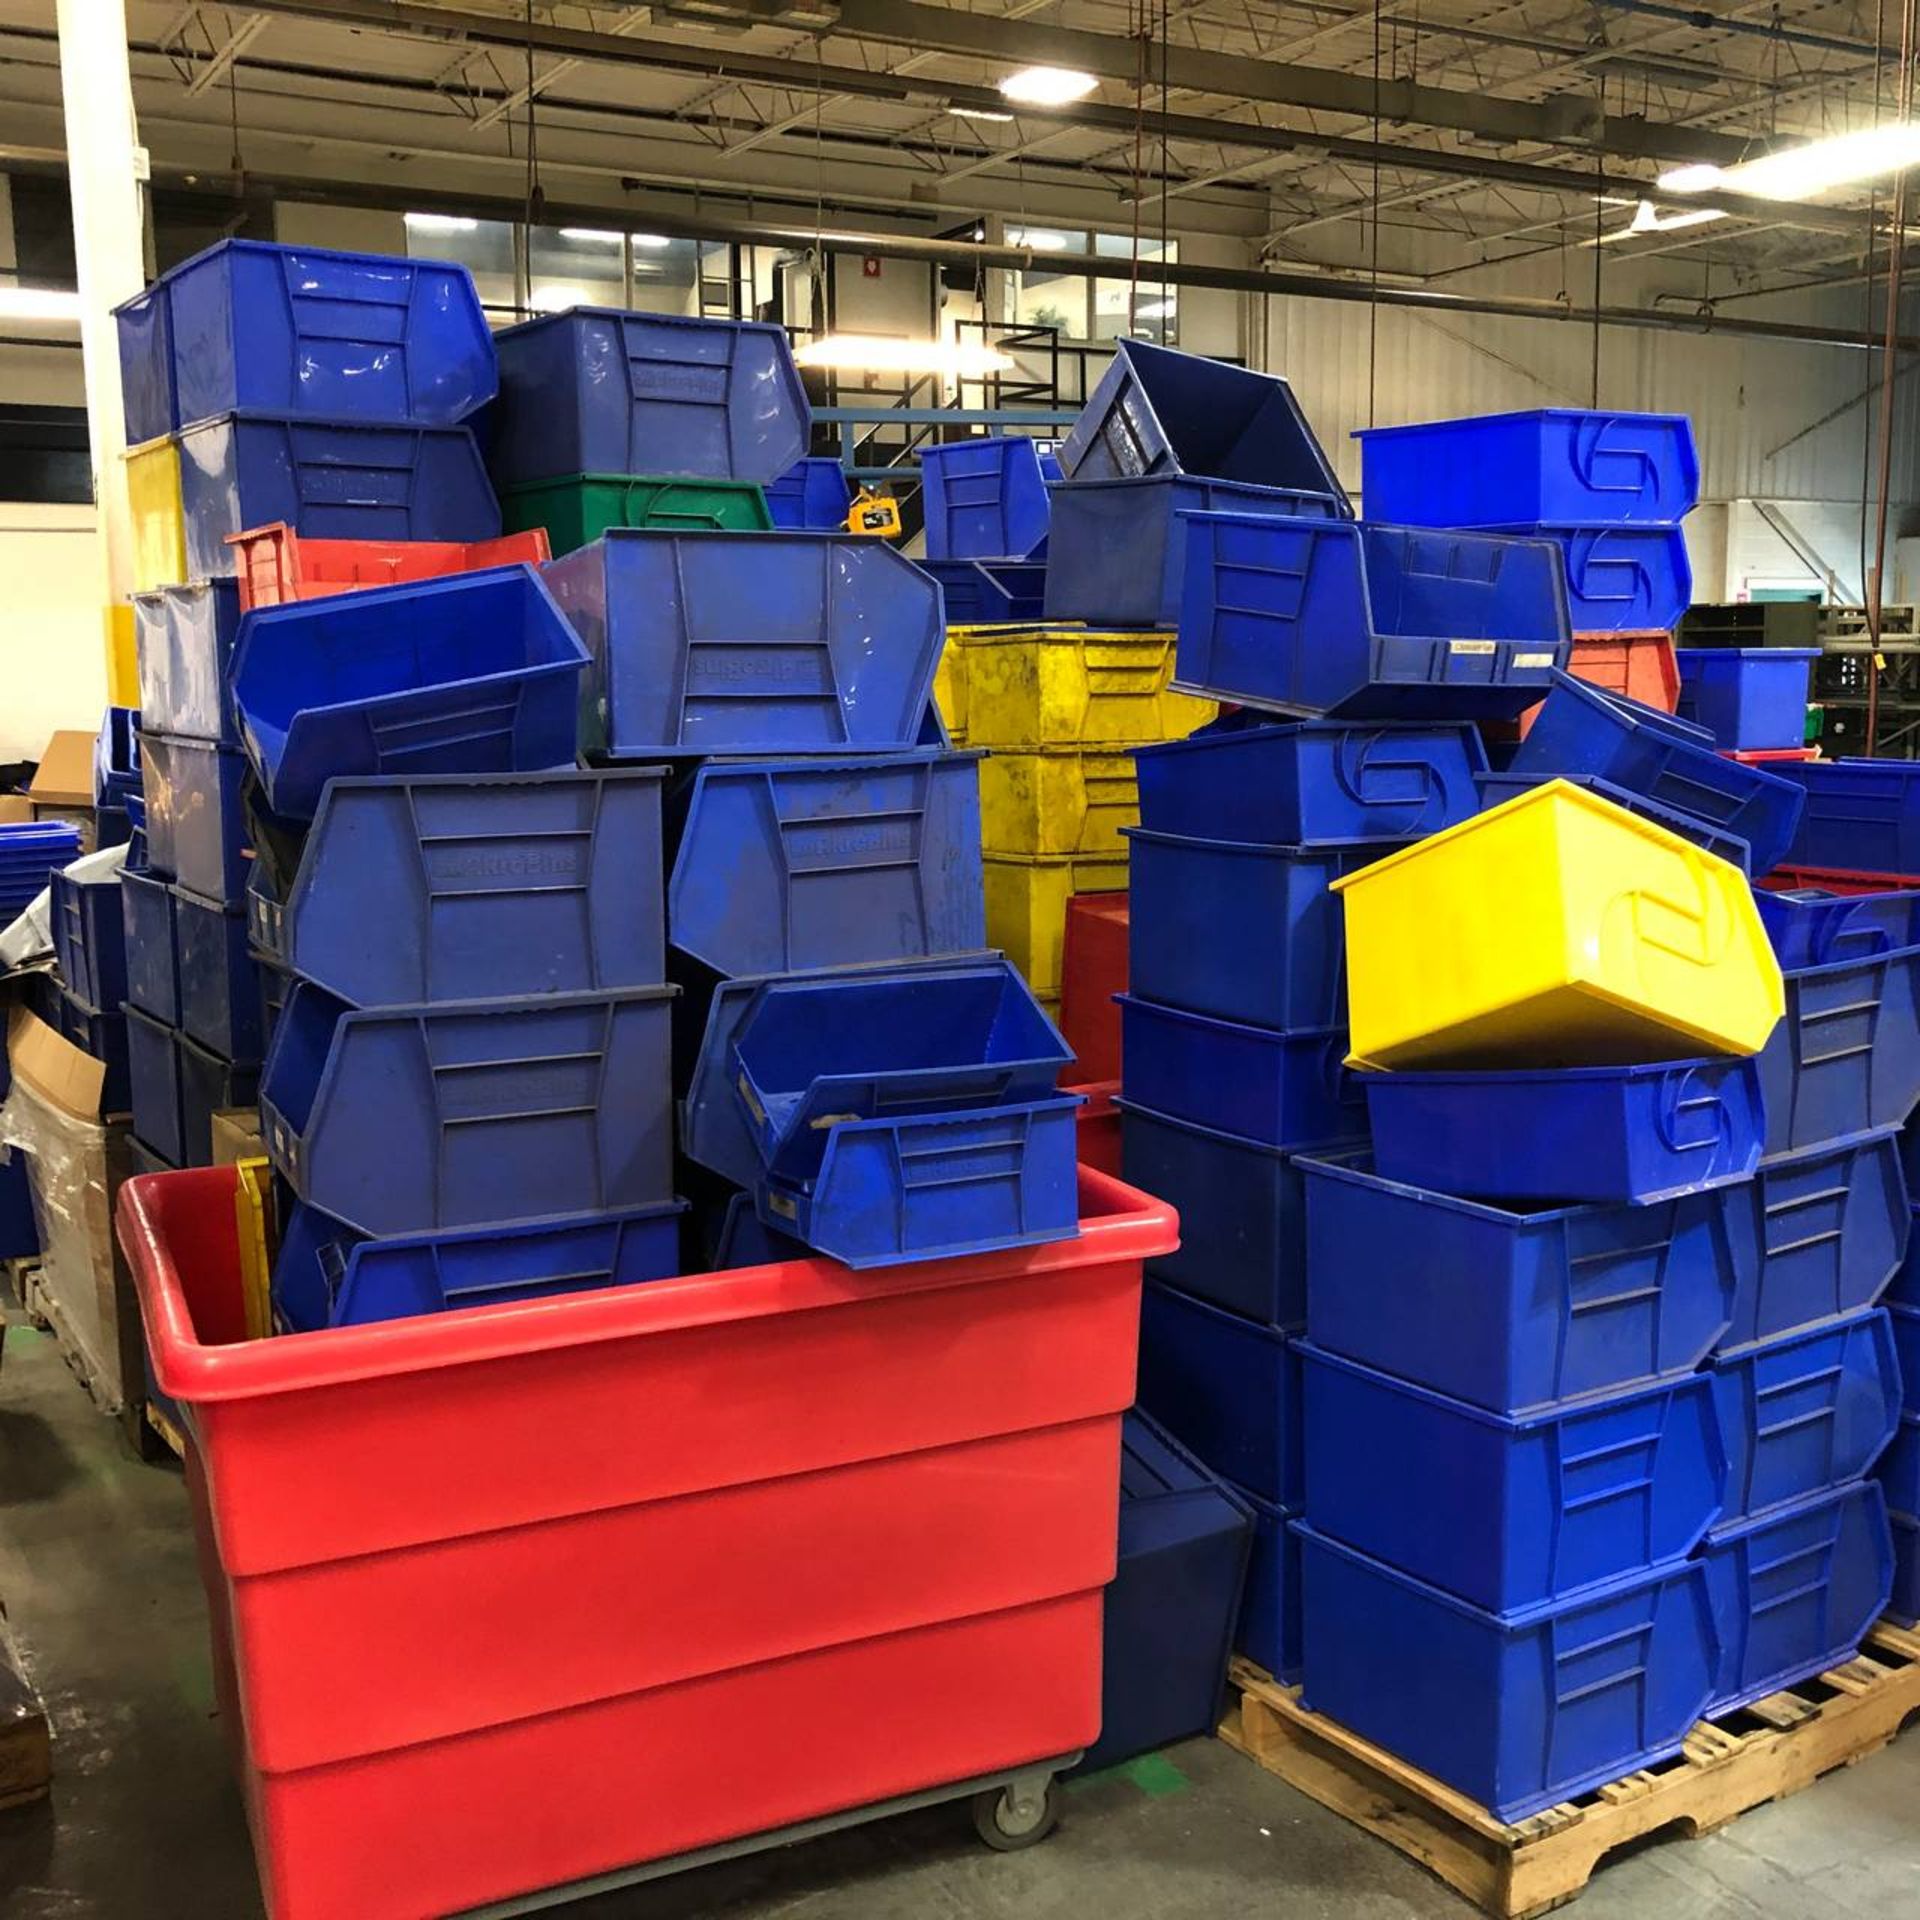 8 Skids of Assorted Sized Plastic Bins - Image 4 of 4